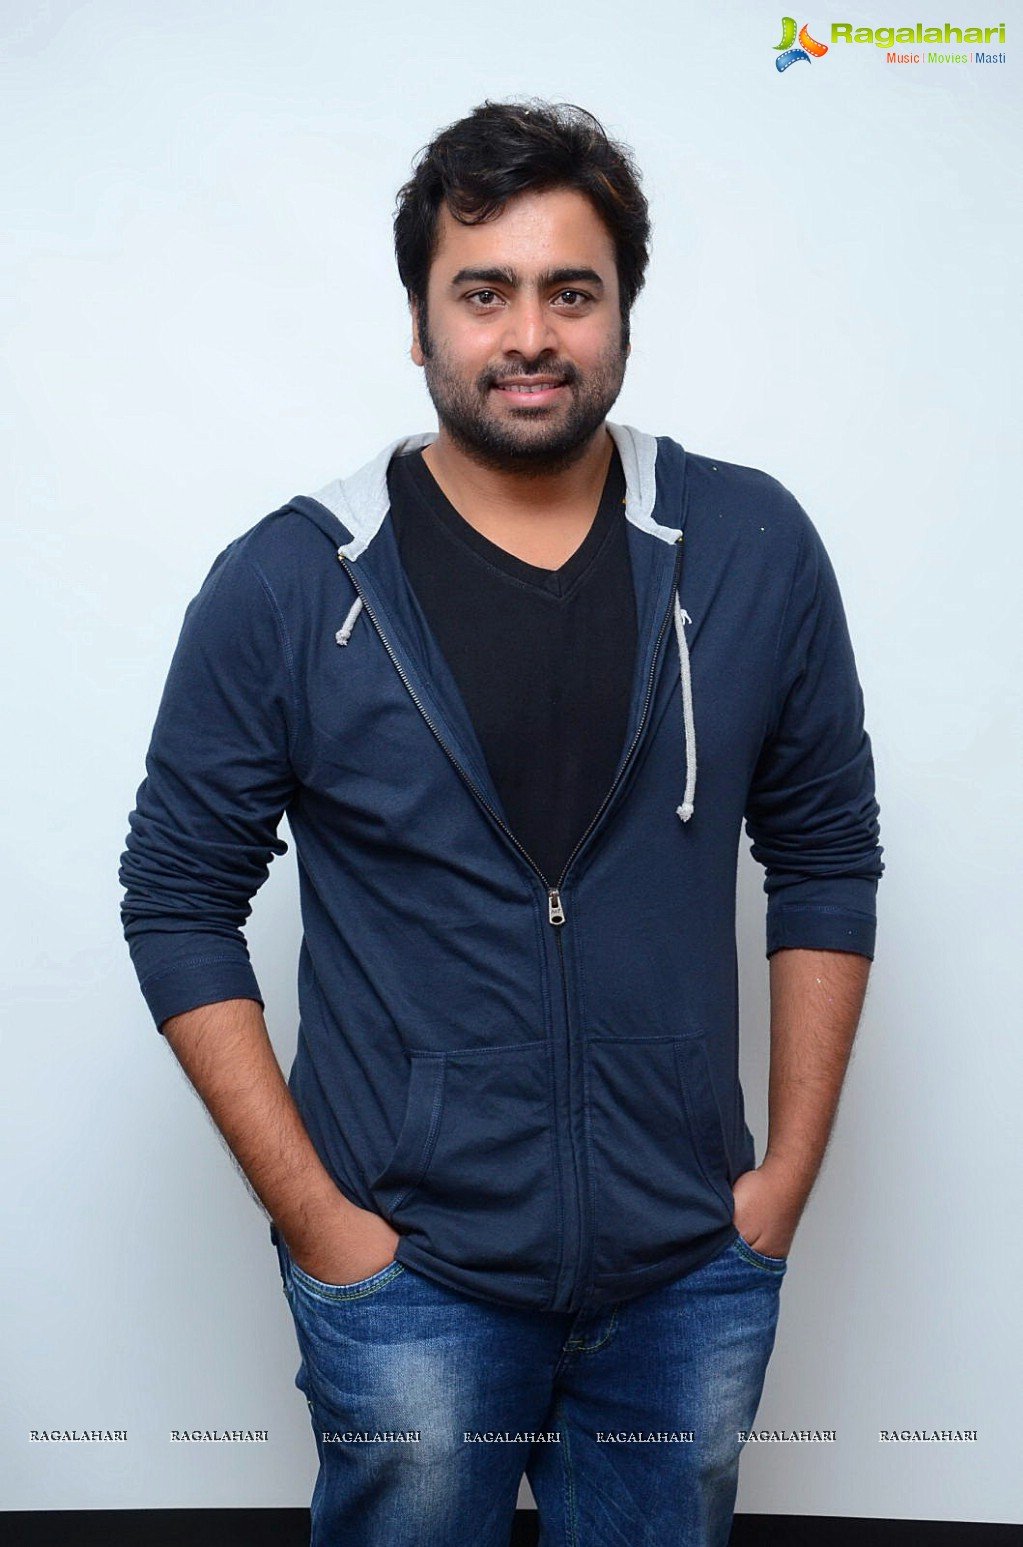 Nara Rohit's New Year 2015 Celebrations with Fans